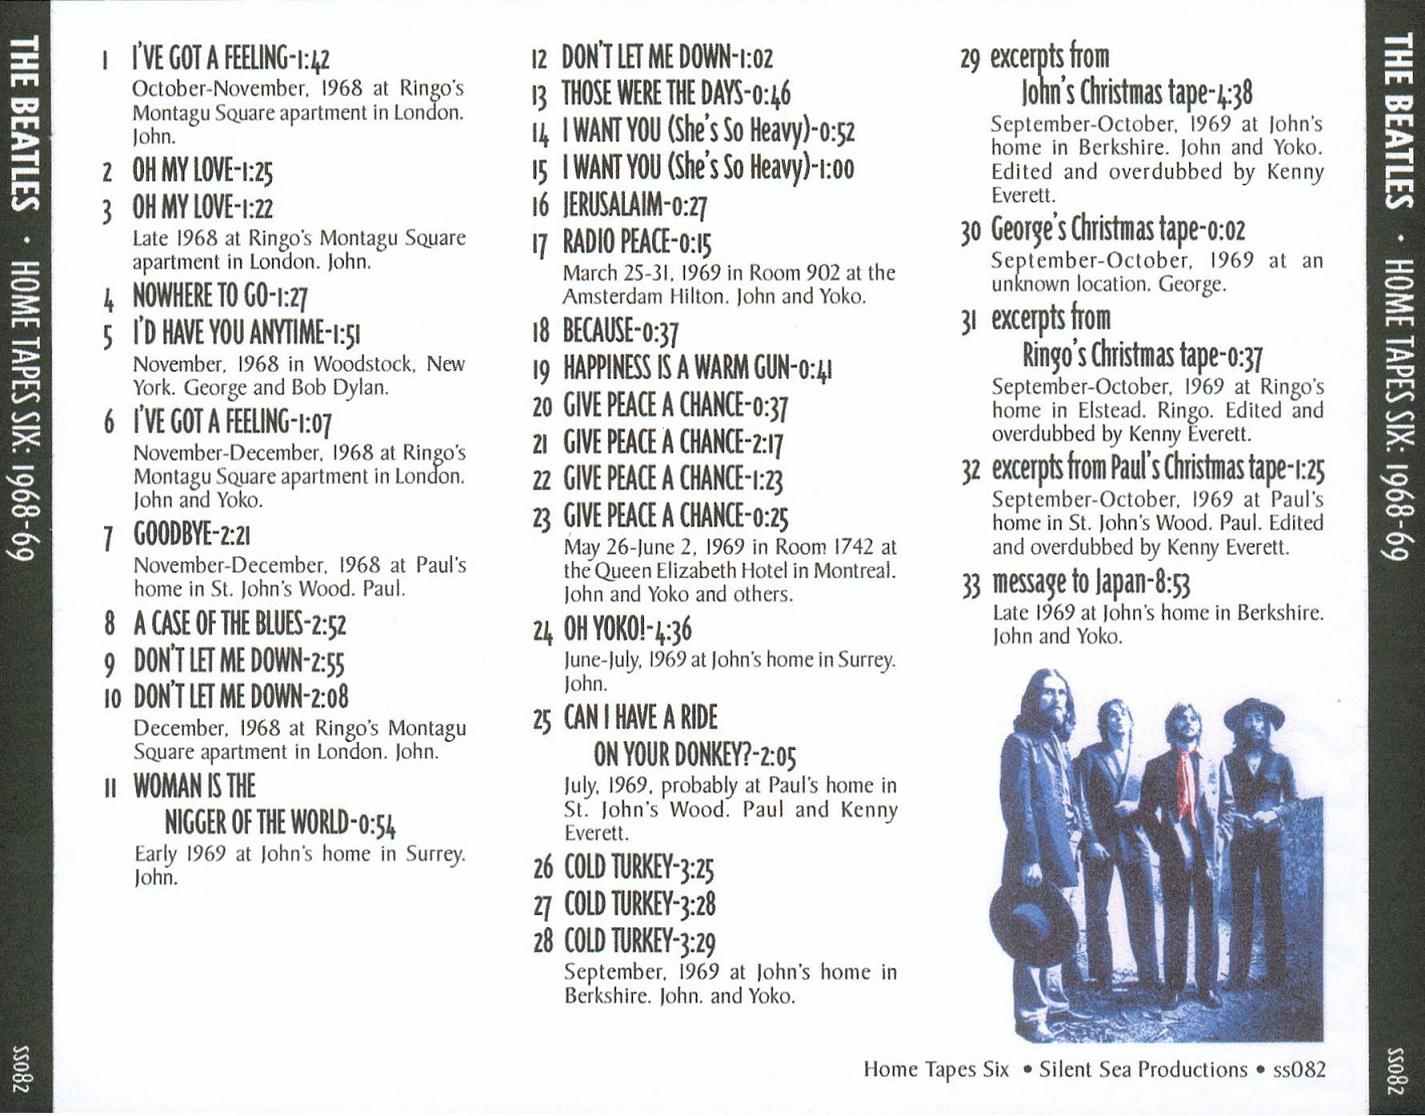 Complete Home Recordings 1968-69back